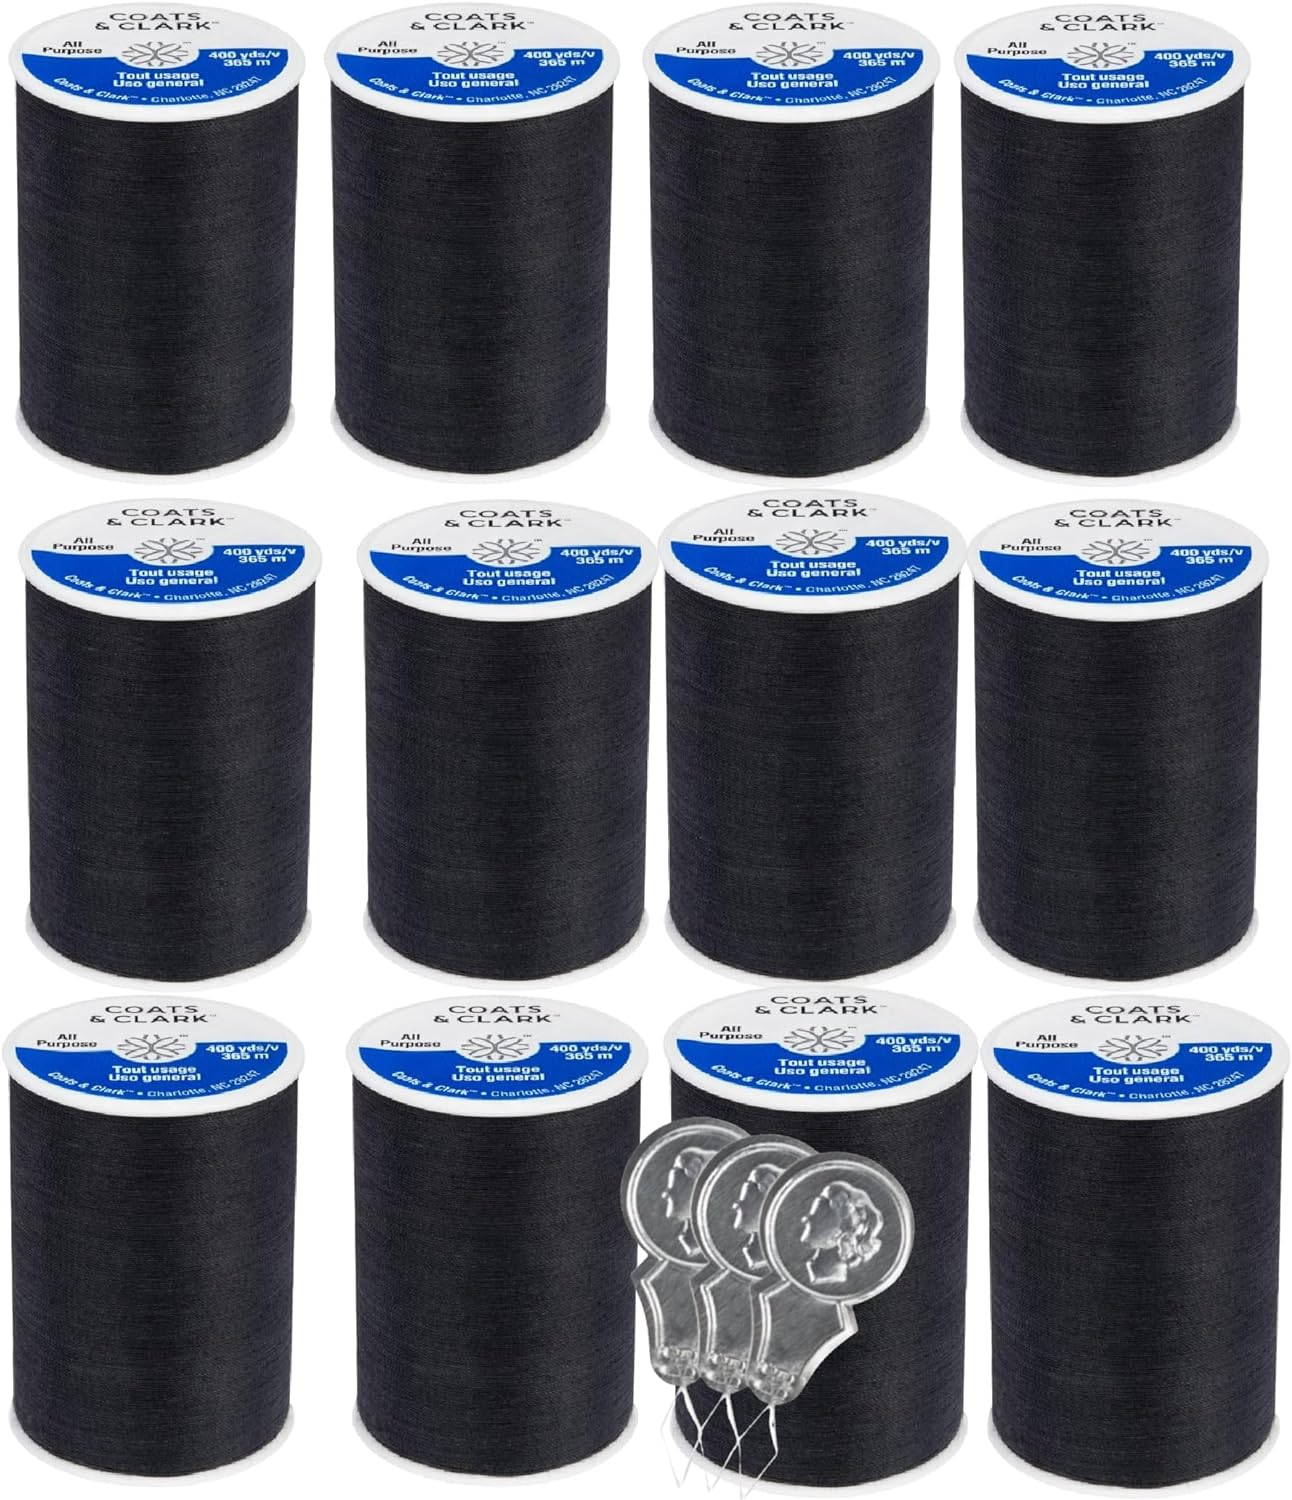 Coats & Clark 400 Yards All-purpose Sewing Thread WHITE or BLACK